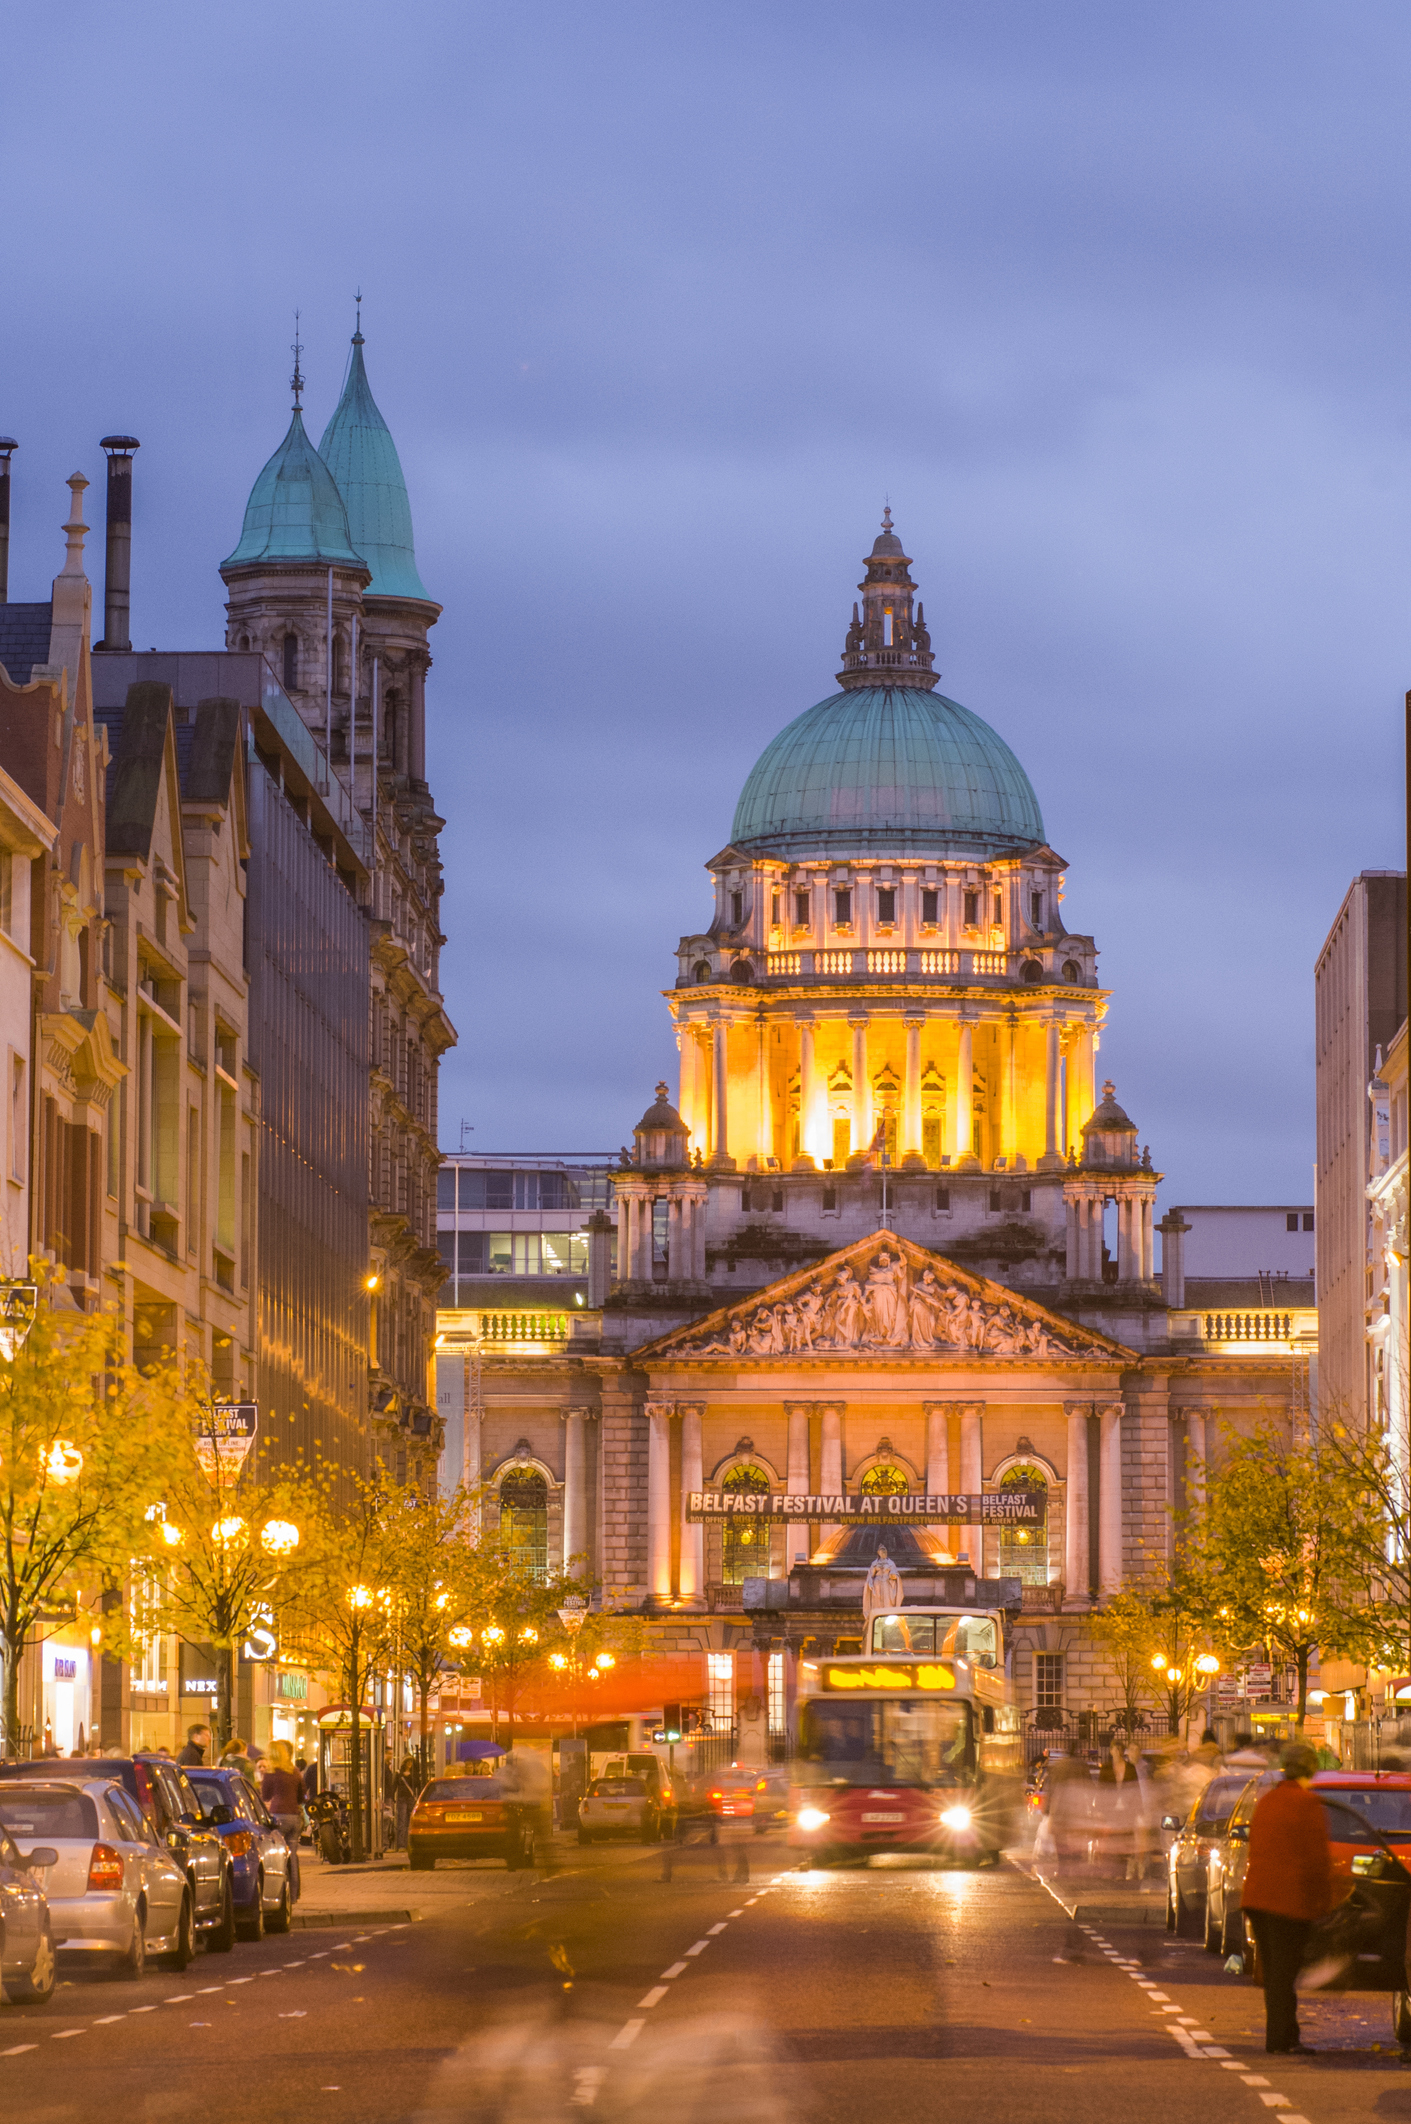 Evening view of Belfast City Hall illuminated, with busy street life and cars